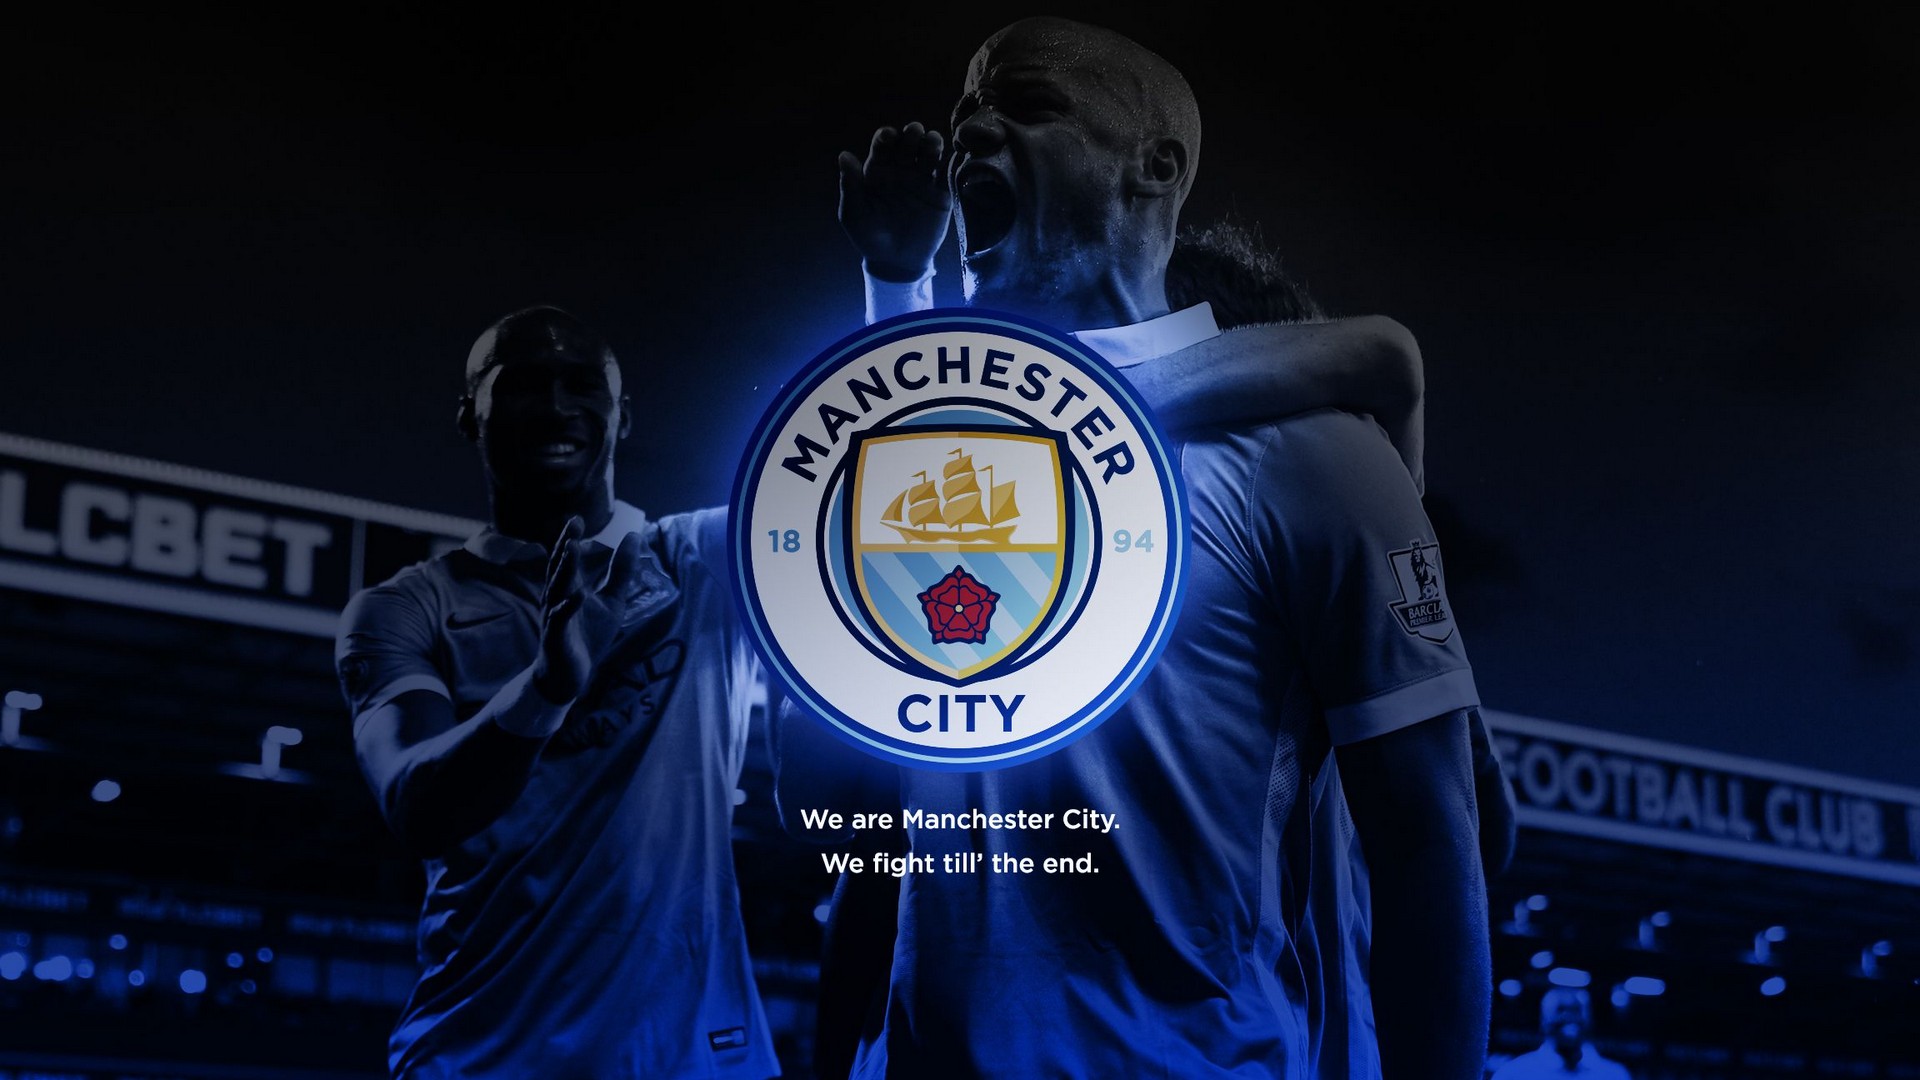 Manchester City FC Wallpaper HD with high-resolution 1920x1080 pixel. You can use this wallpaper for your Desktop Computers, Mac Screensavers, Windows Backgrounds, iPhone Wallpapers, Tablet or Android Lock screen and another Mobile device